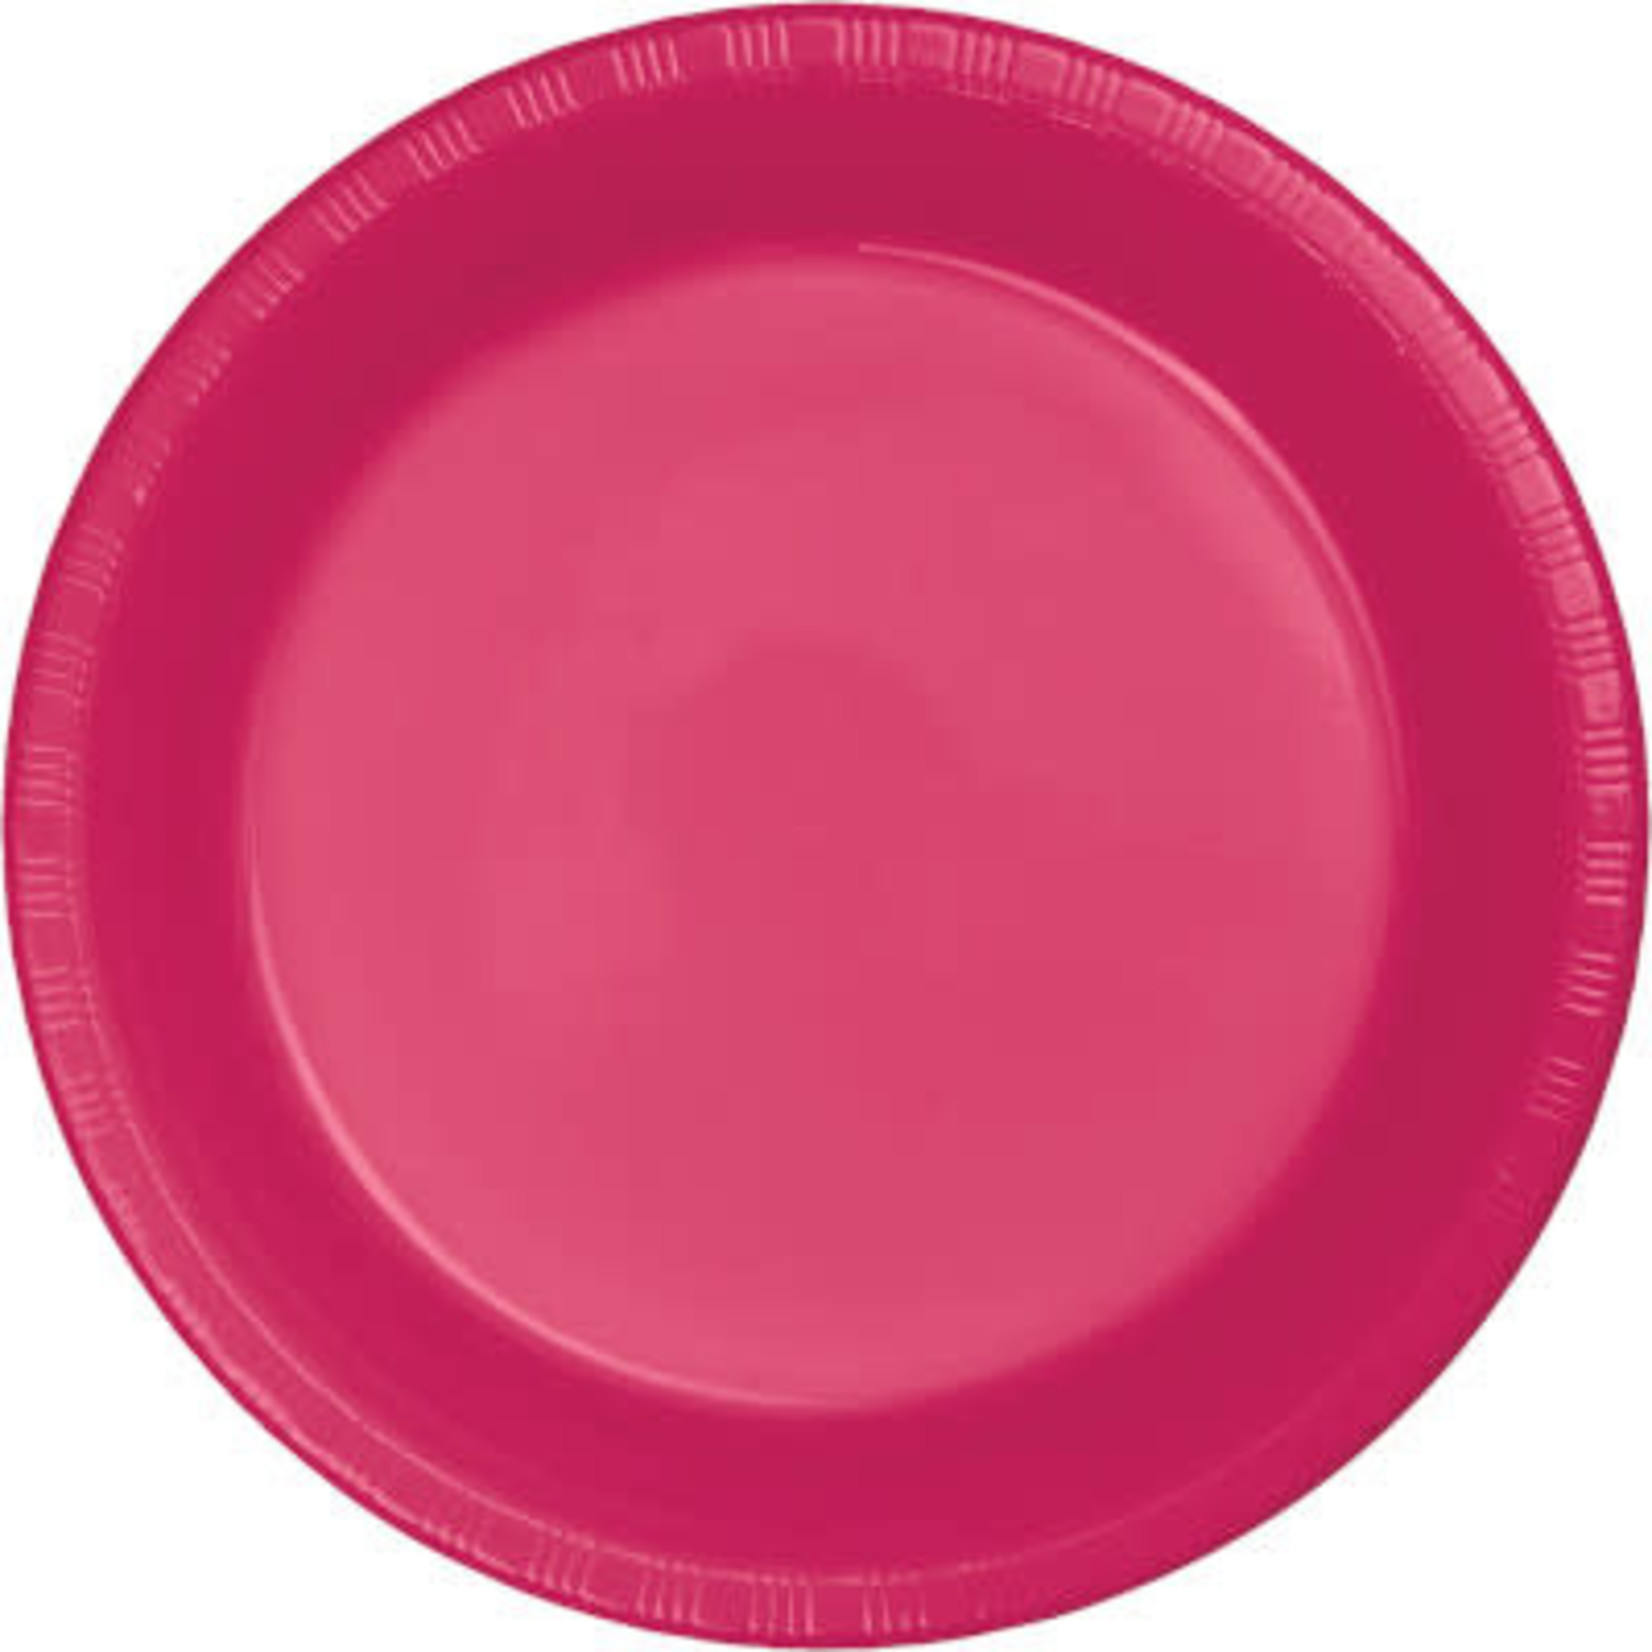 Touch of Color 7" Magenta Pink Plastic Plates - 20ct.